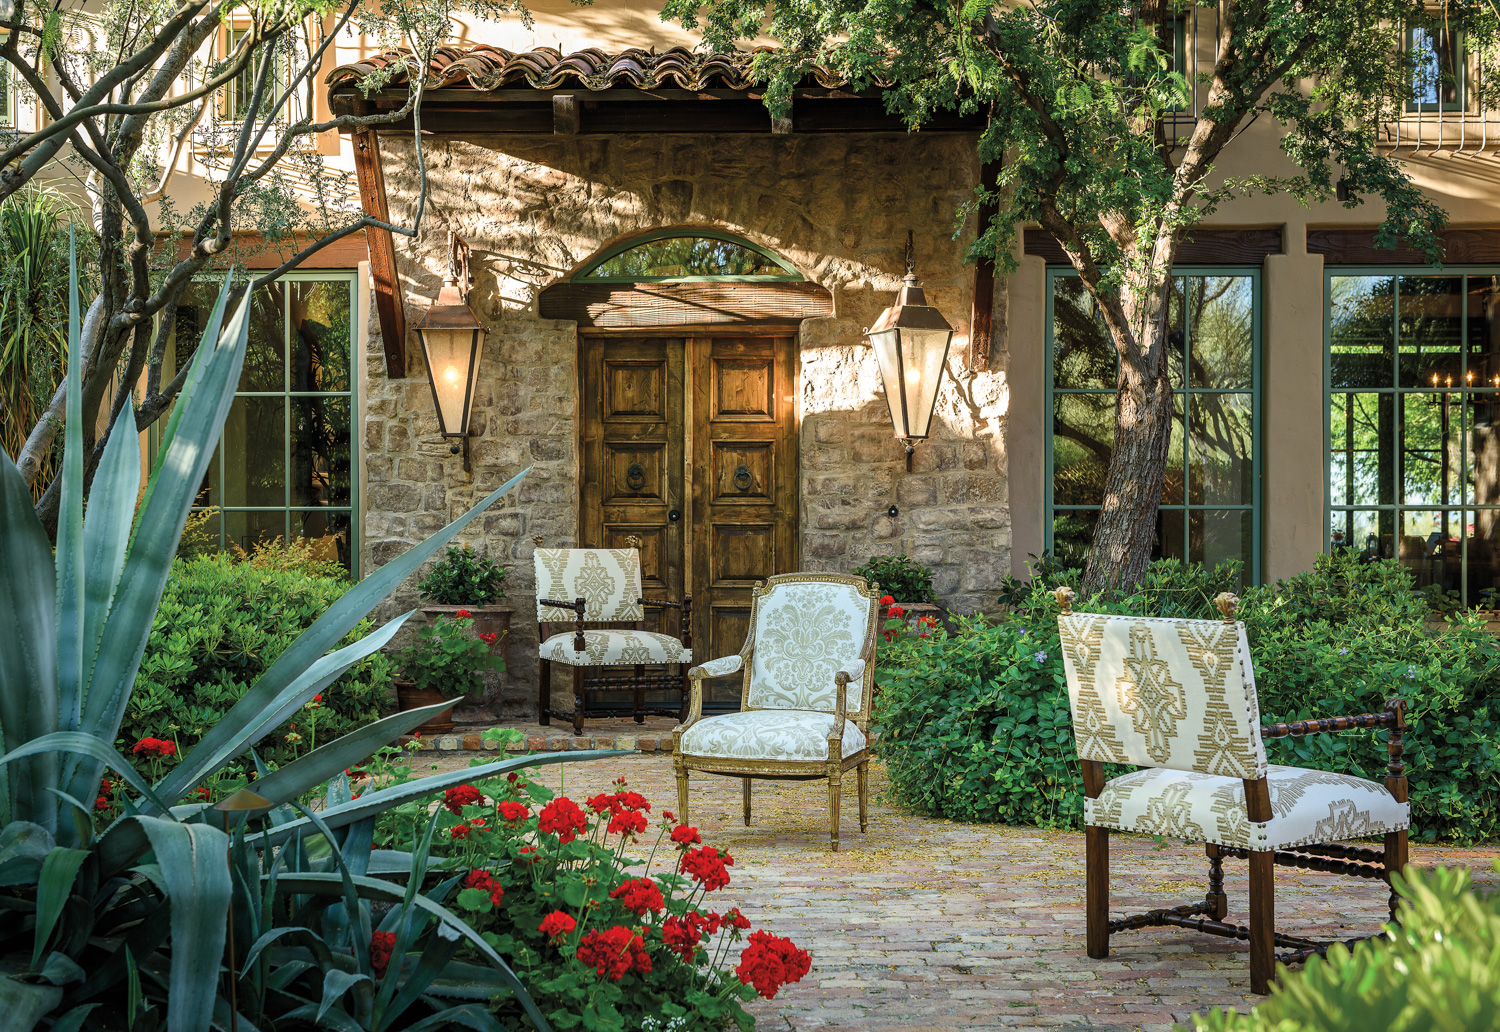 Three upholstered chairs sitting in an outdoor courtyard surrounded by plants.